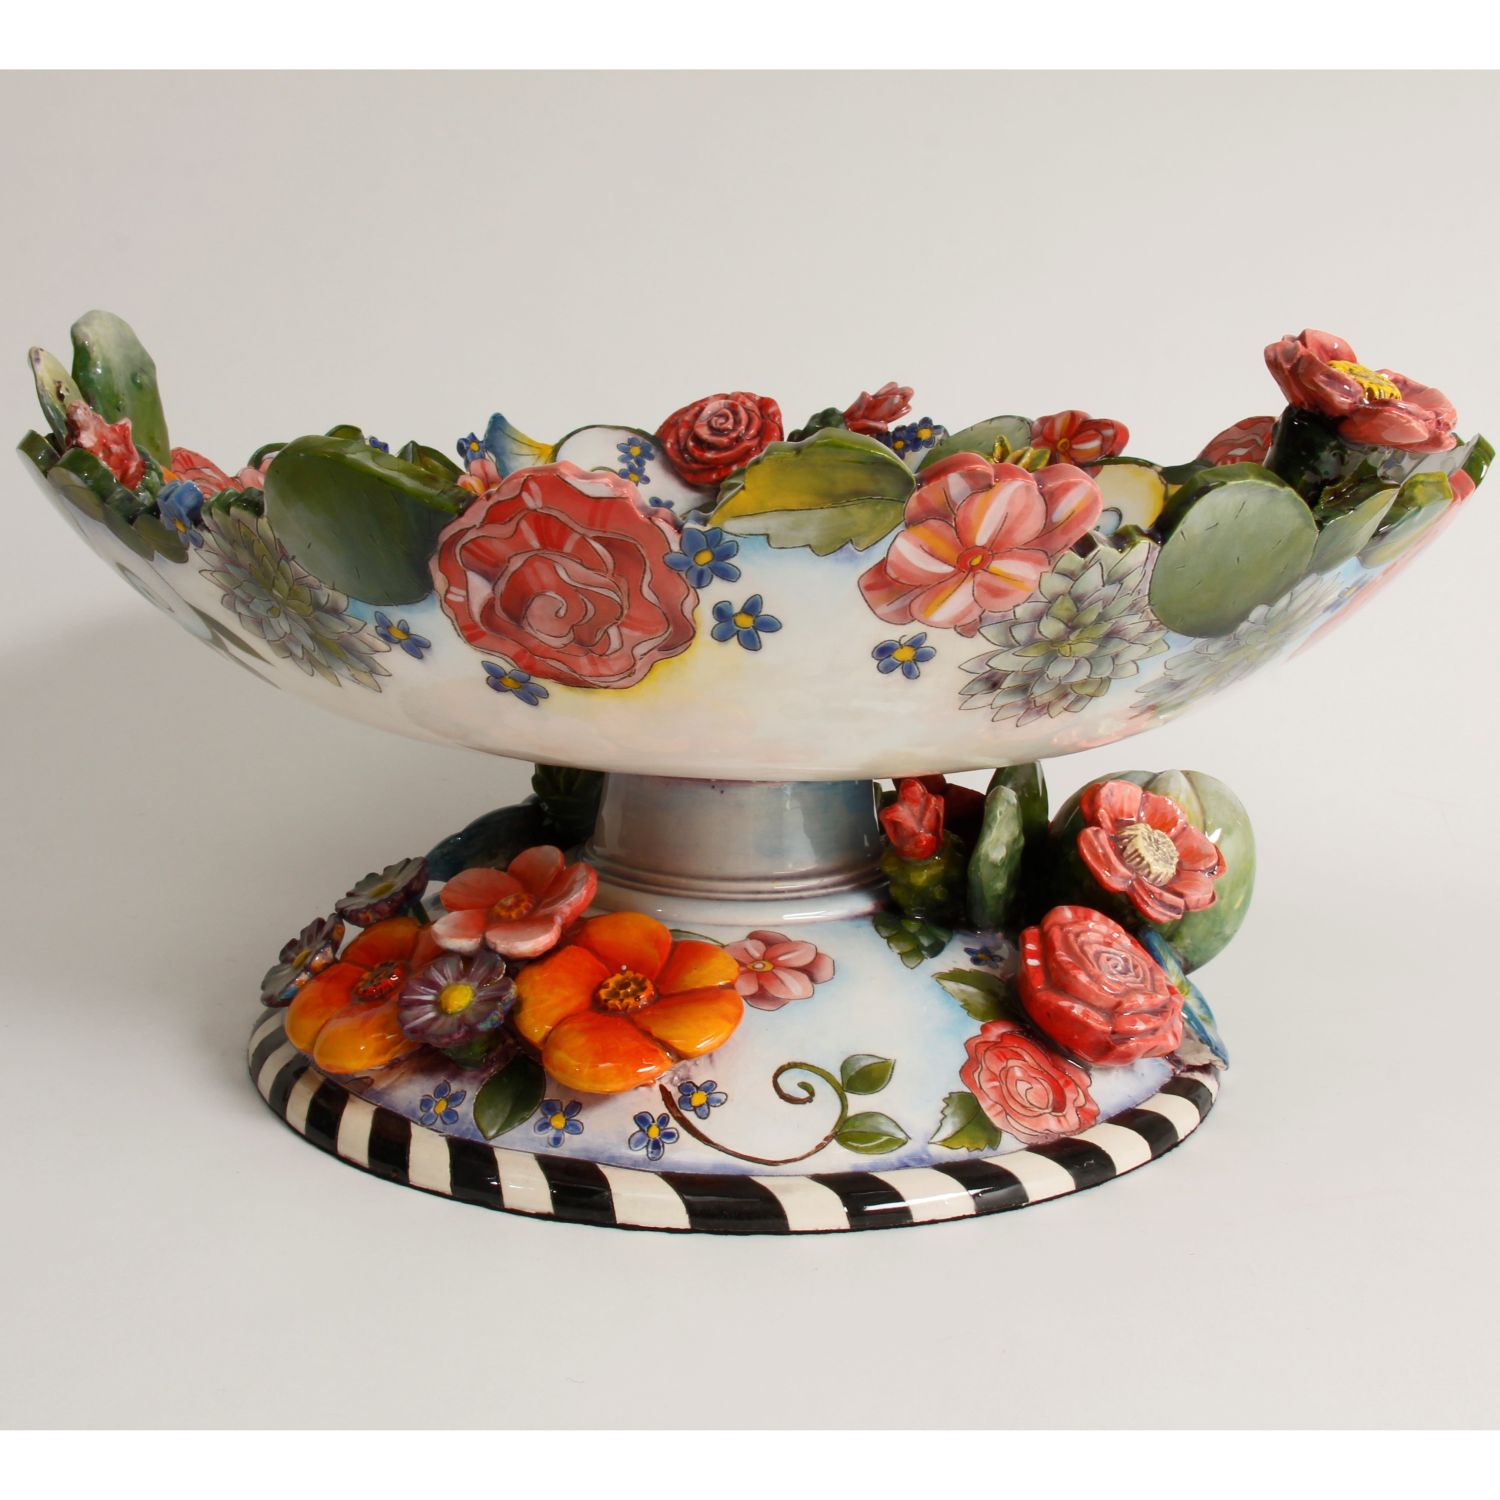 DaNisha Sculpture: Floral Bowl with Succulents Product Image 1 of 4